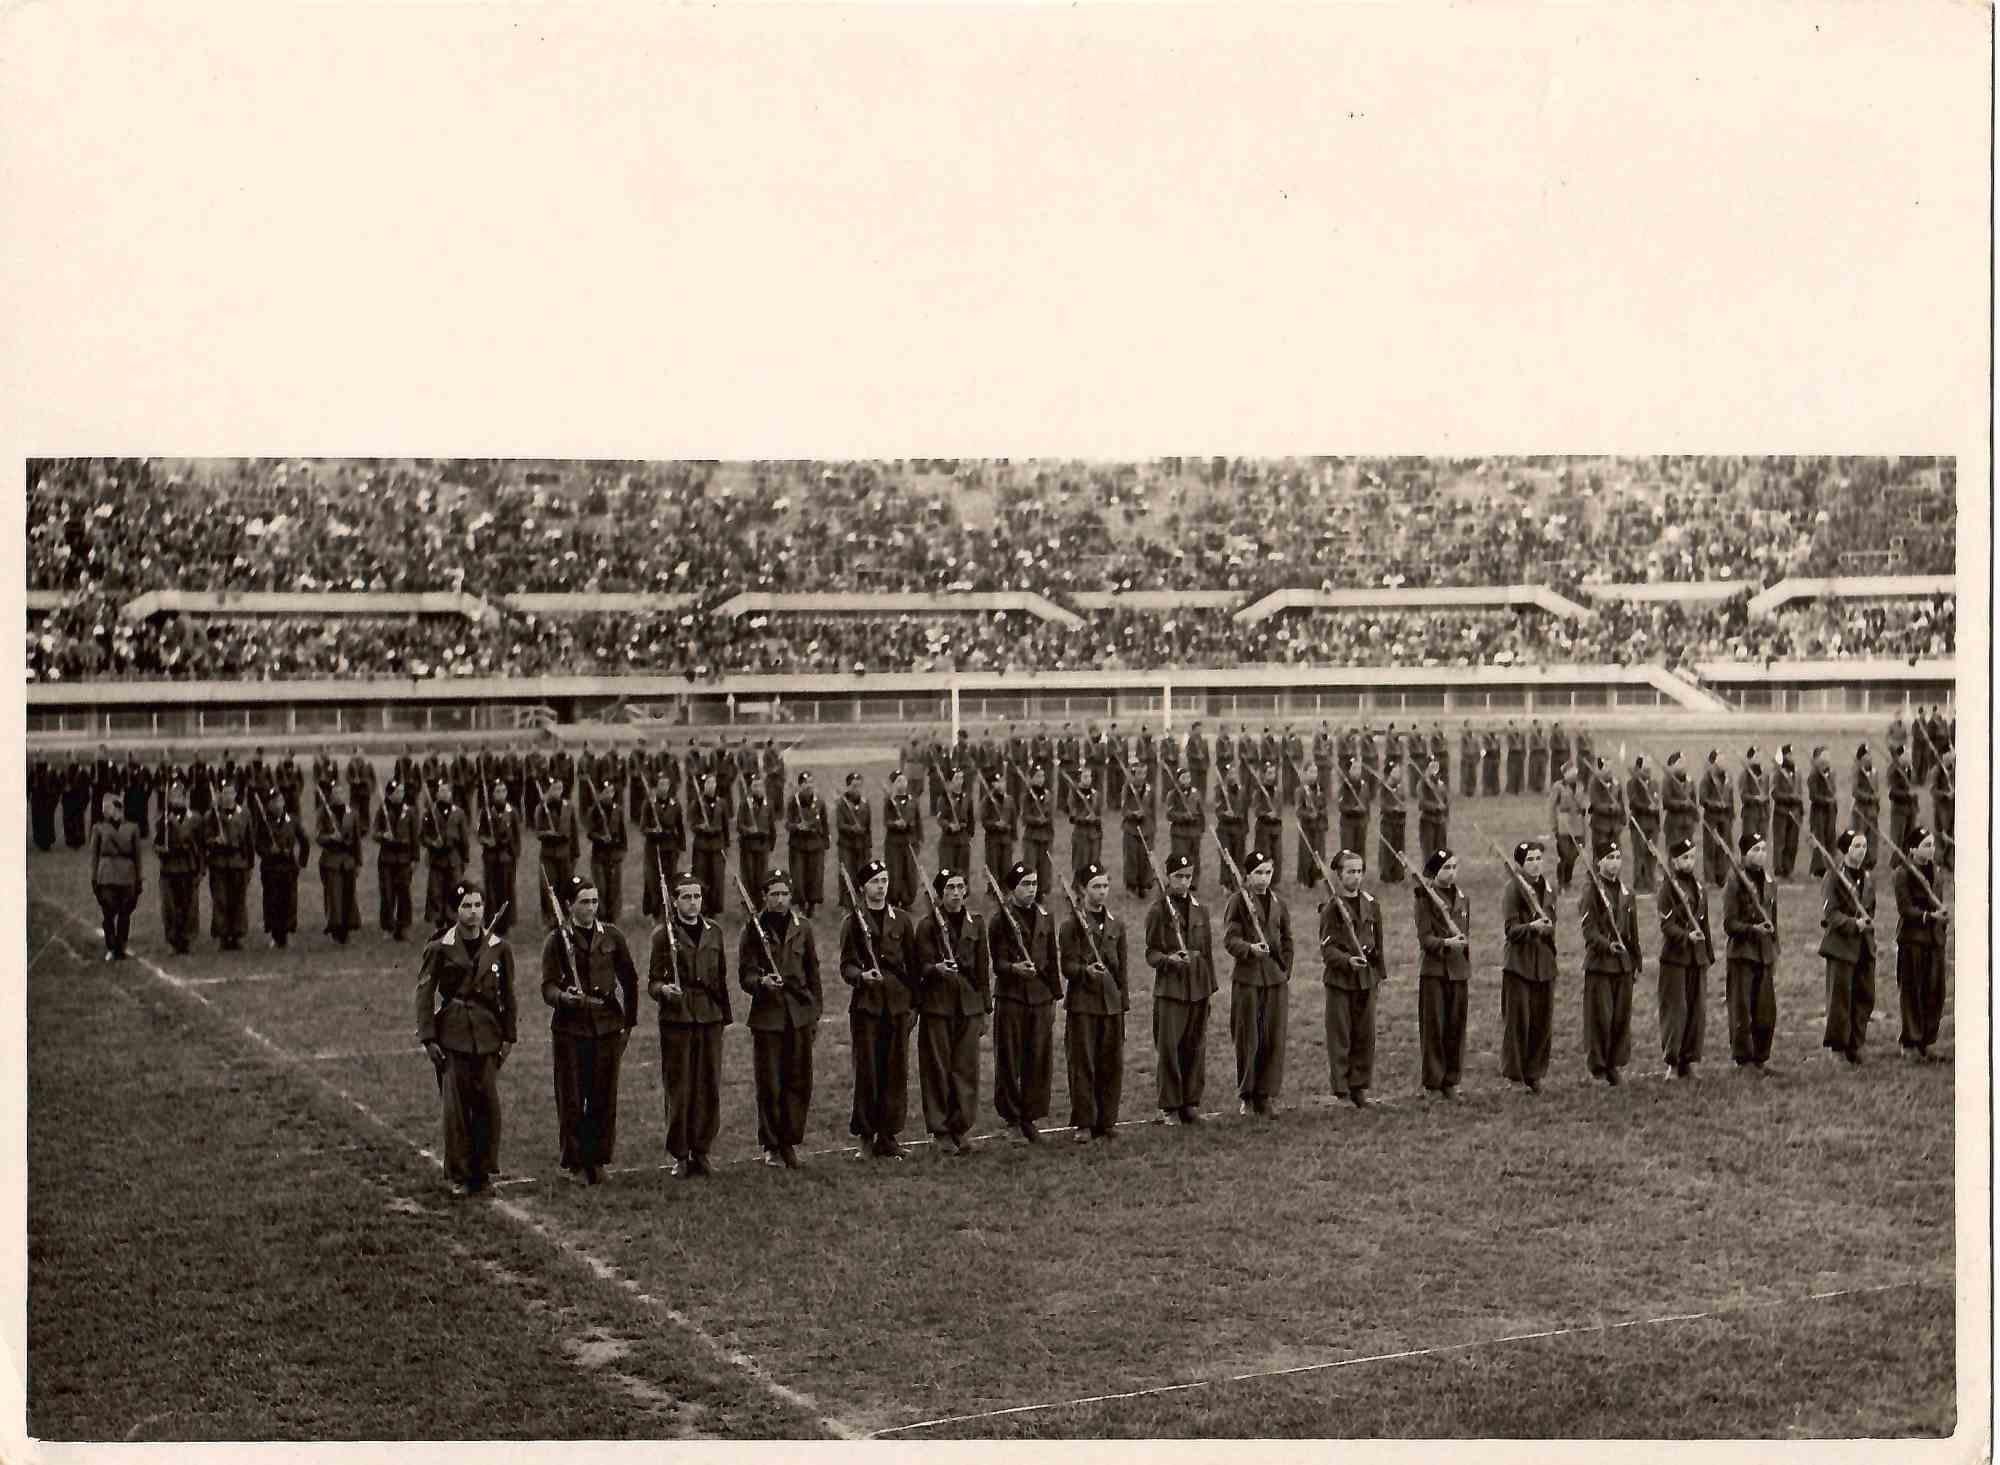 Military Show in the Stadium - Vintage B/W Photo - 1930